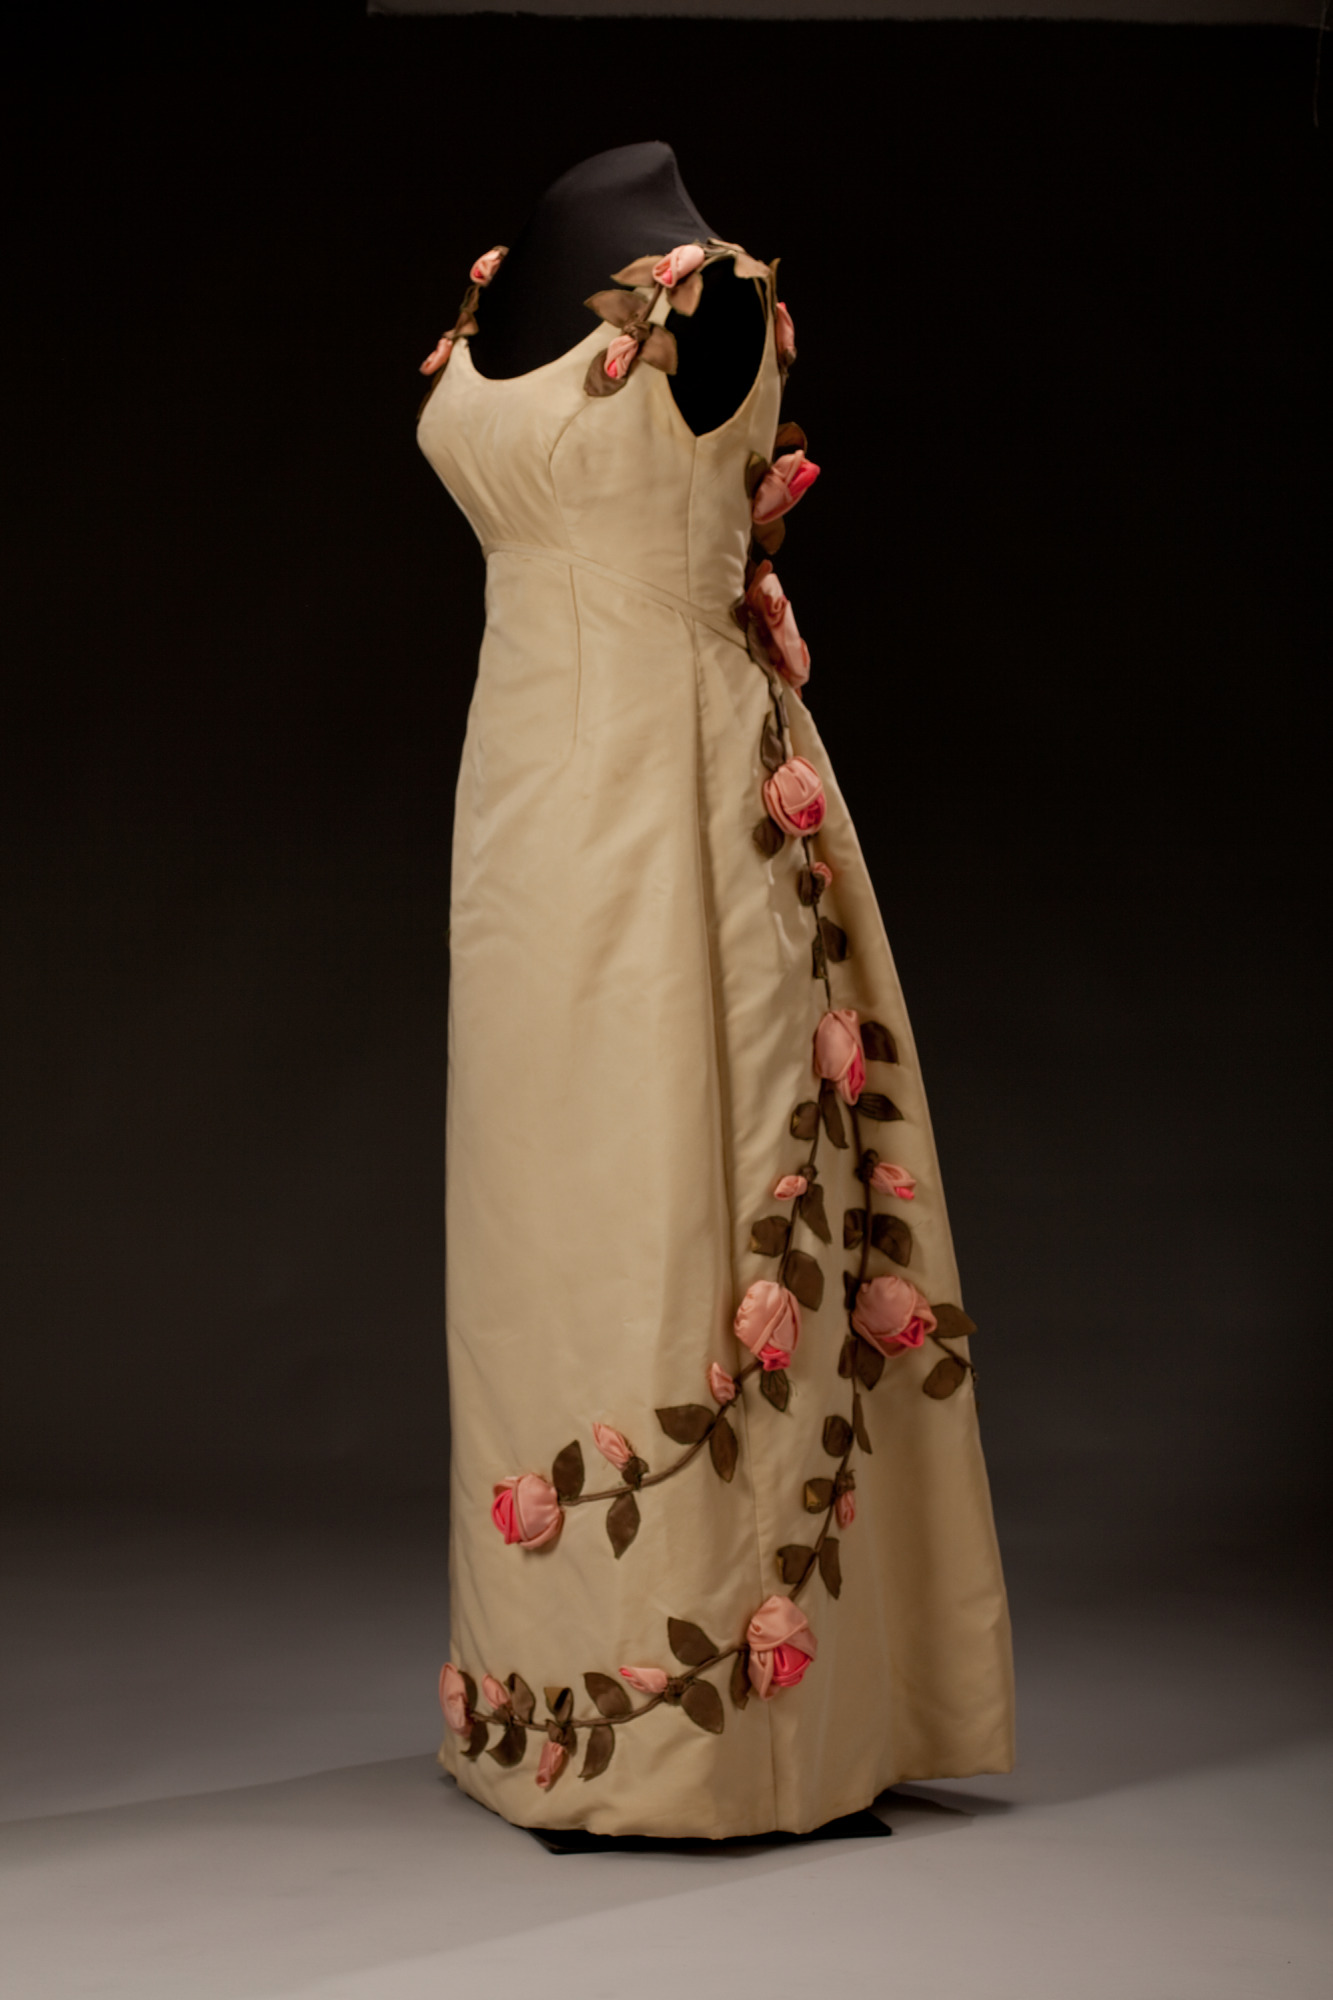 Floral detailed gown by Ann Lowe, circa 1960